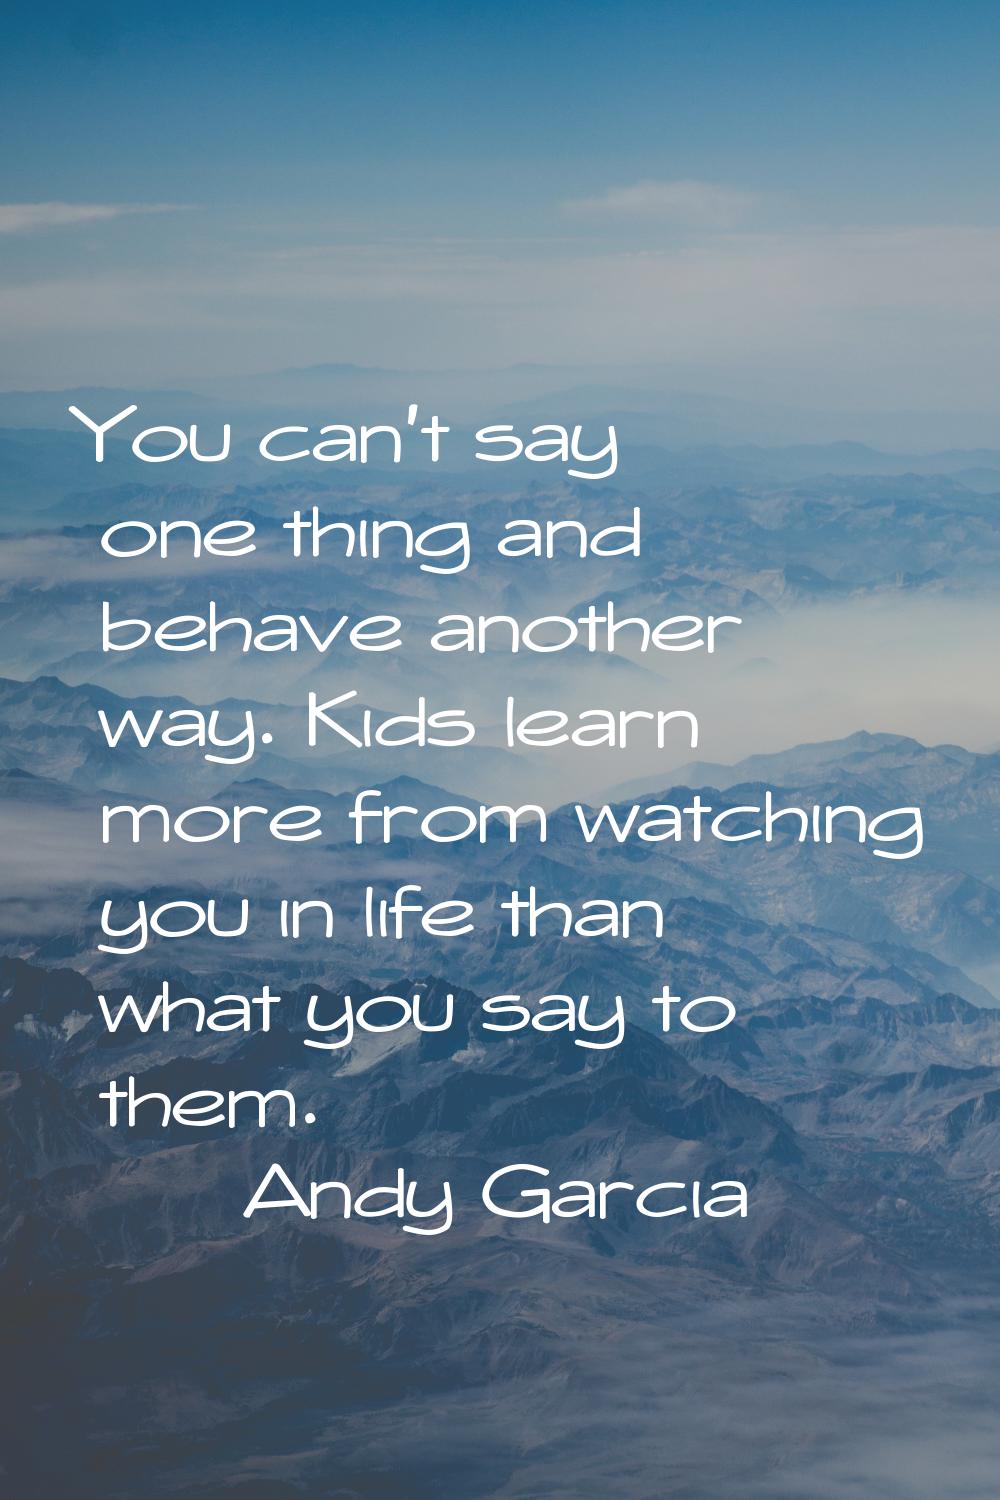 You can't say one thing and behave another way. Kids learn more from watching you in life than what